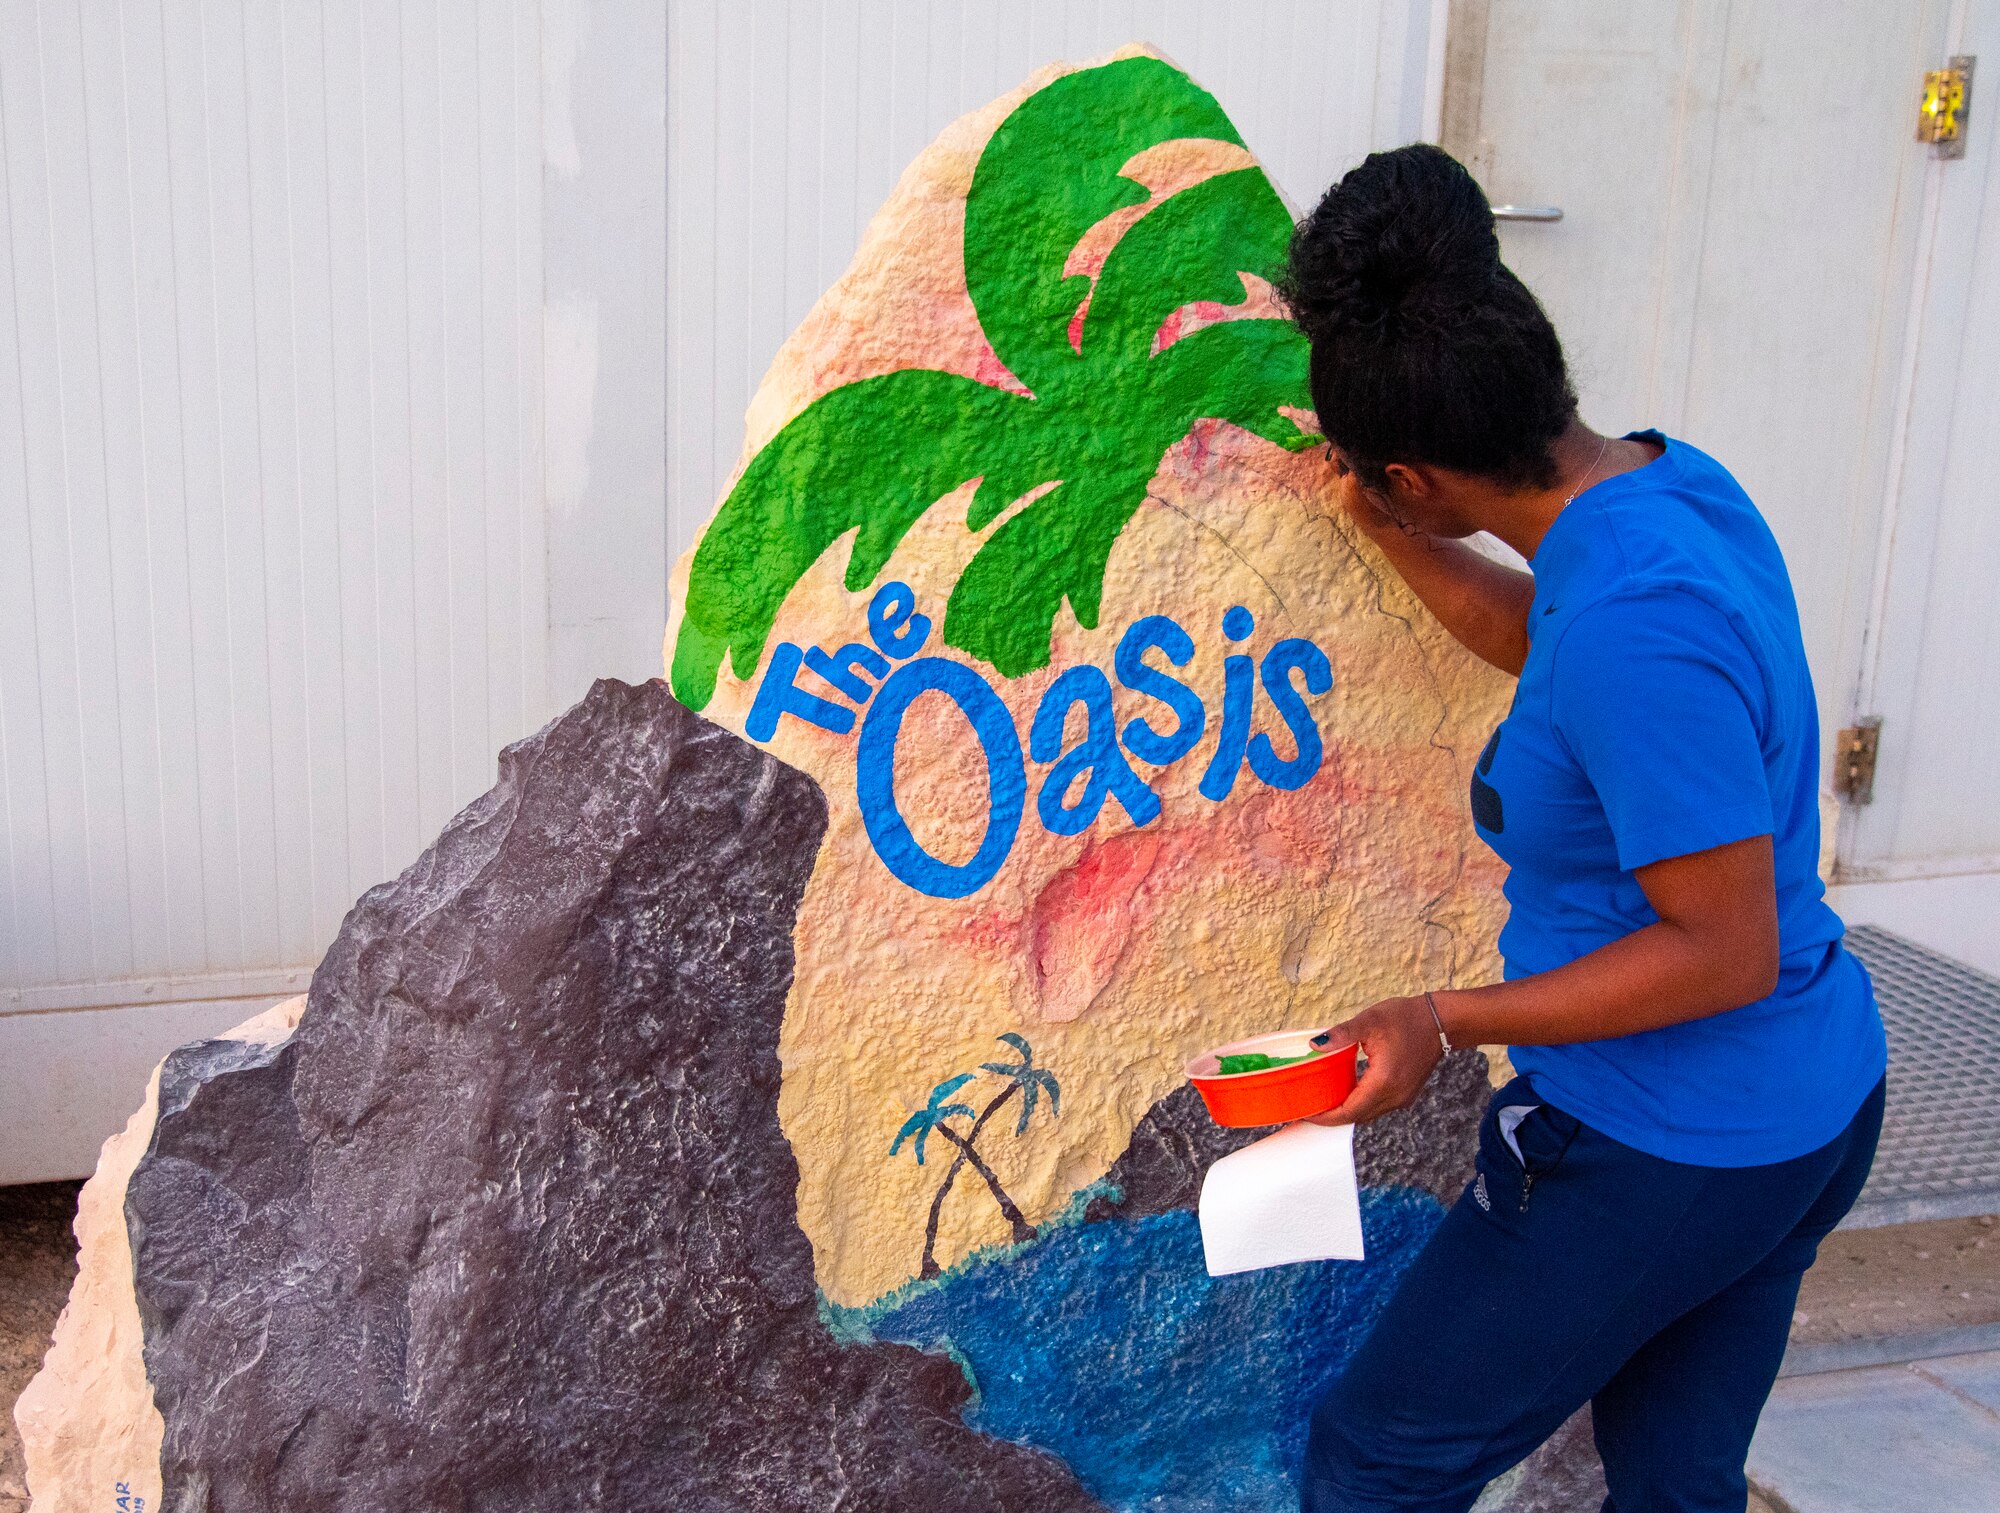 Staff Sgt. Jasmin Walker, 332d Wing Special Agencies, repaints a decorative rock mural in front of the Oasis at an undisclosed location in Southwest Asia, Sept. 4, 2022. The Oasis is a volunteer-run quiet area where Airmen can relax with snacks and other amenities. (U.S. Air Force photo by: Tech. Sgt. Jim Bentley)